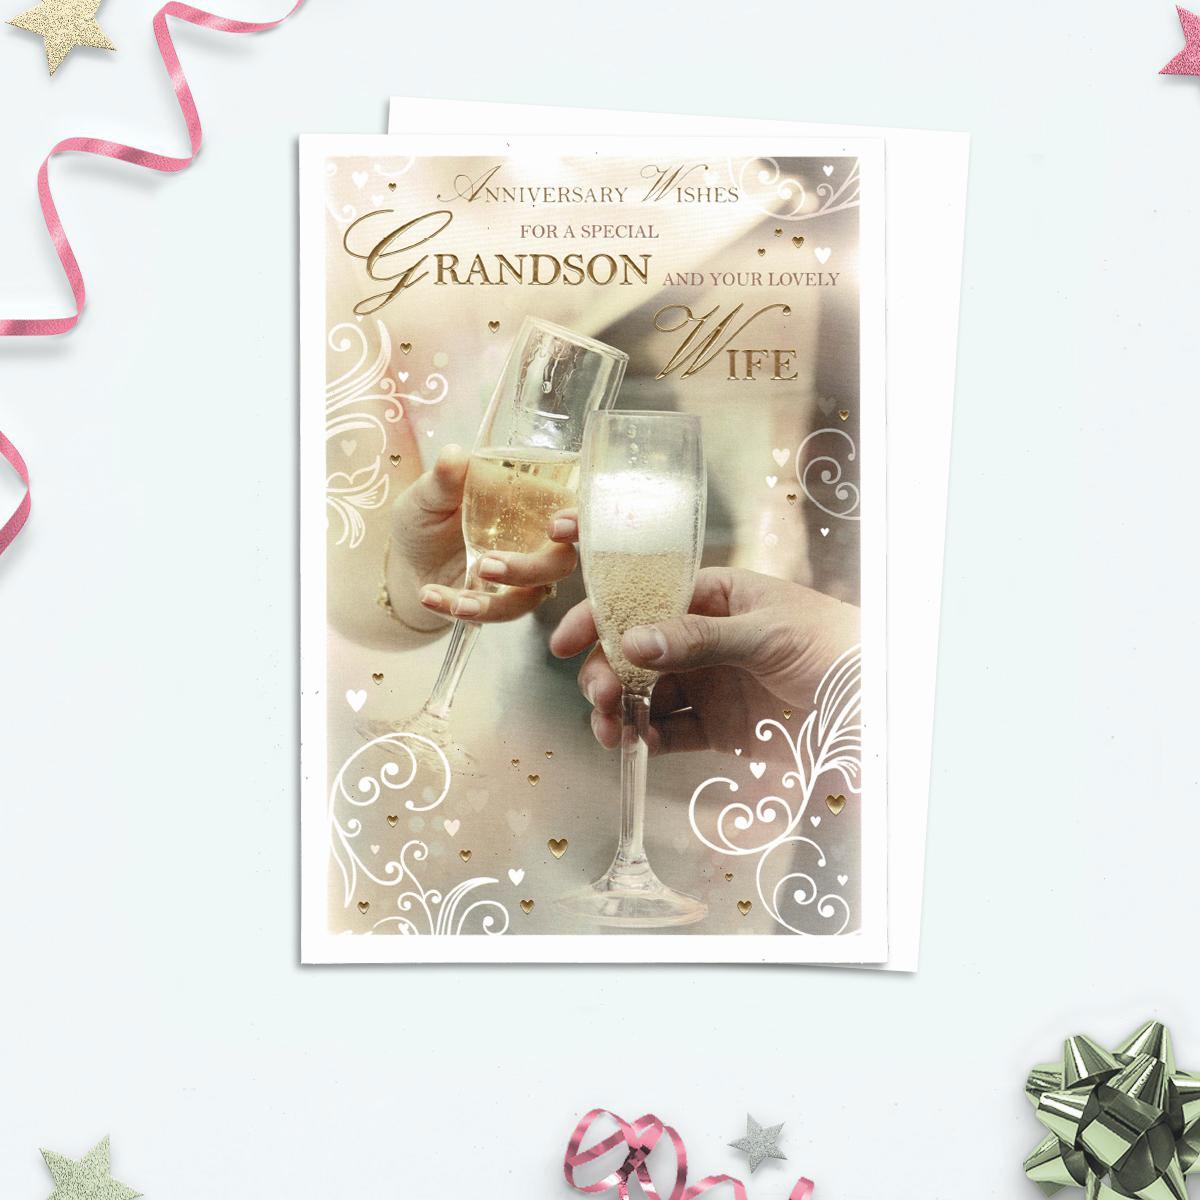 Anniversary Wishes For A Special Grandson And Your Lovely Wife Card Shows A Celebratory Champagne Toast In Muted Beige And Brown Colours With White Scrolling And Gold Foil Accents. Complete With White Envelope